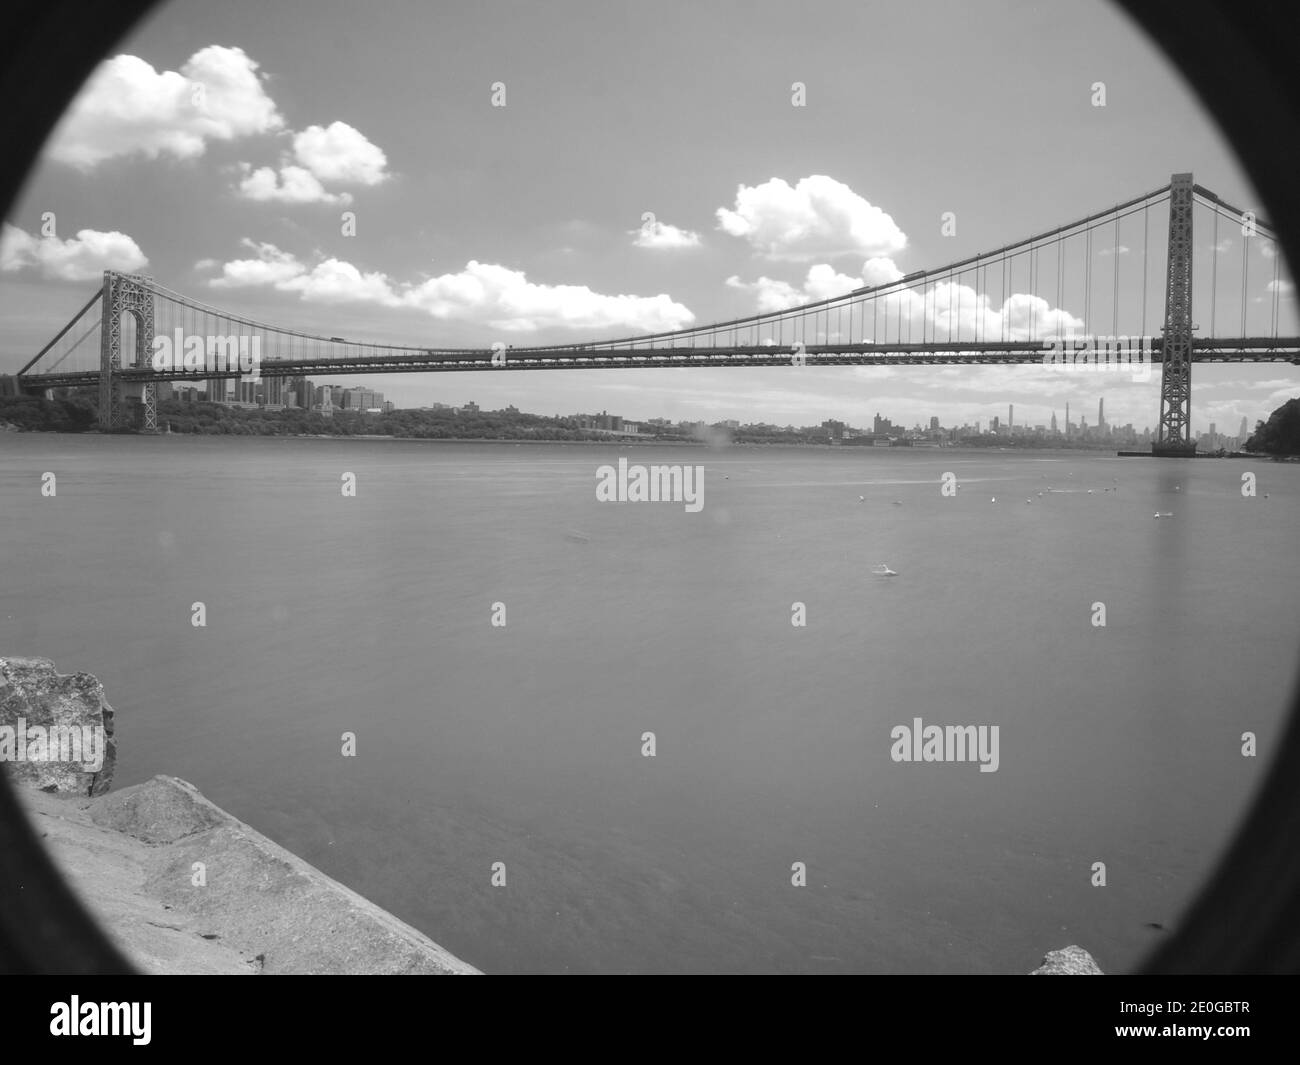 New York City's iconic George Washington Bridge over the Hudson River between Fort Lee, New Jersey and the Bronx in New York City. Opened in 1931. Stock Photo